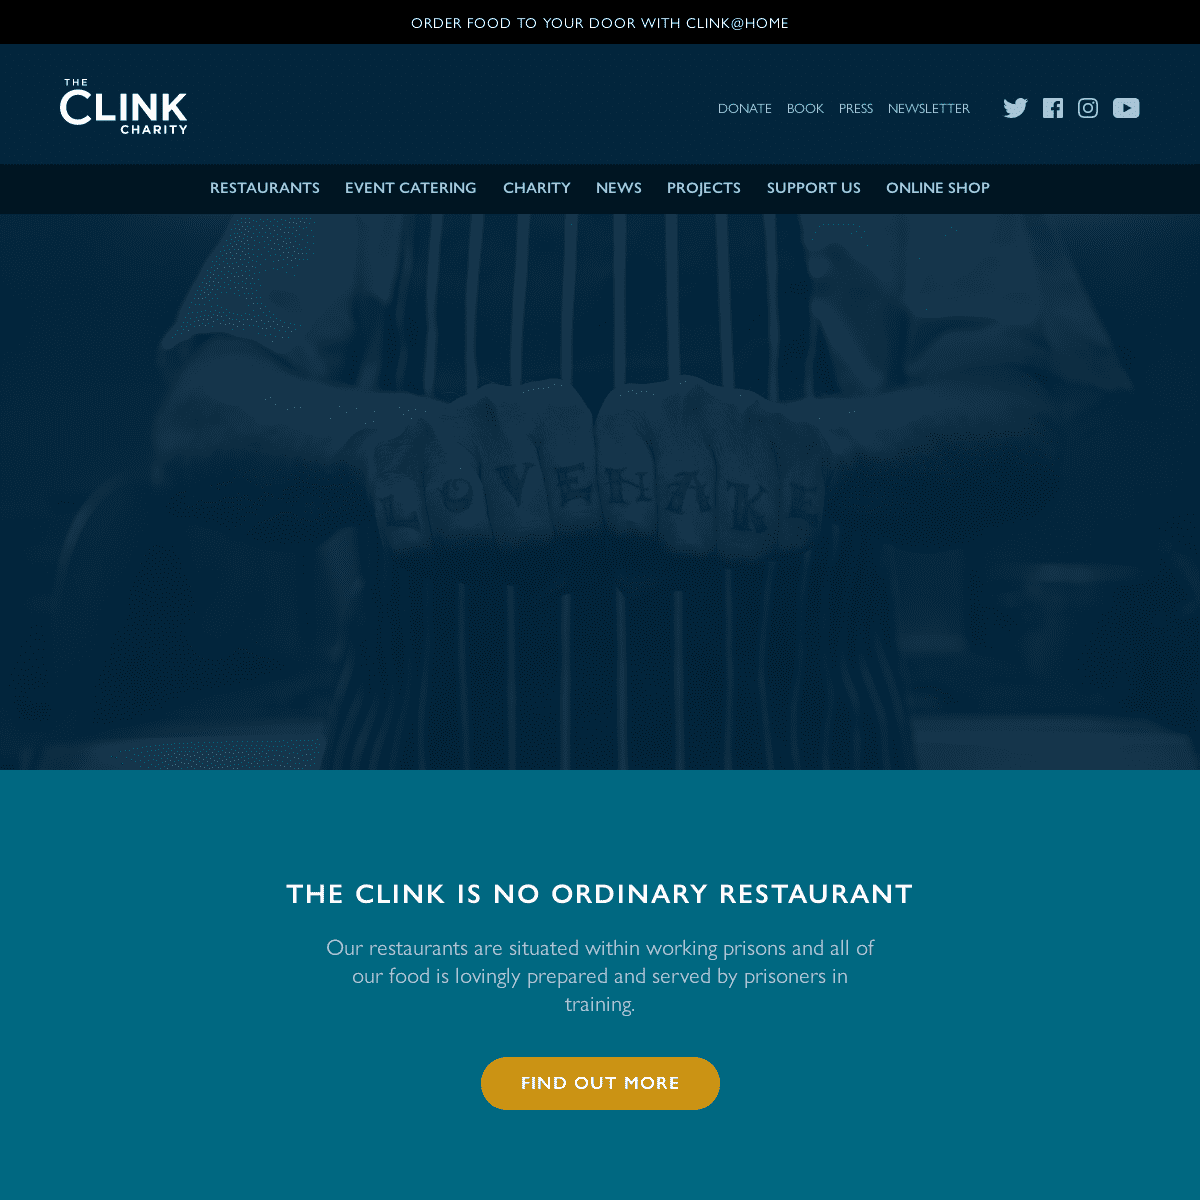 A complete backup of https://theclinkcharity.org